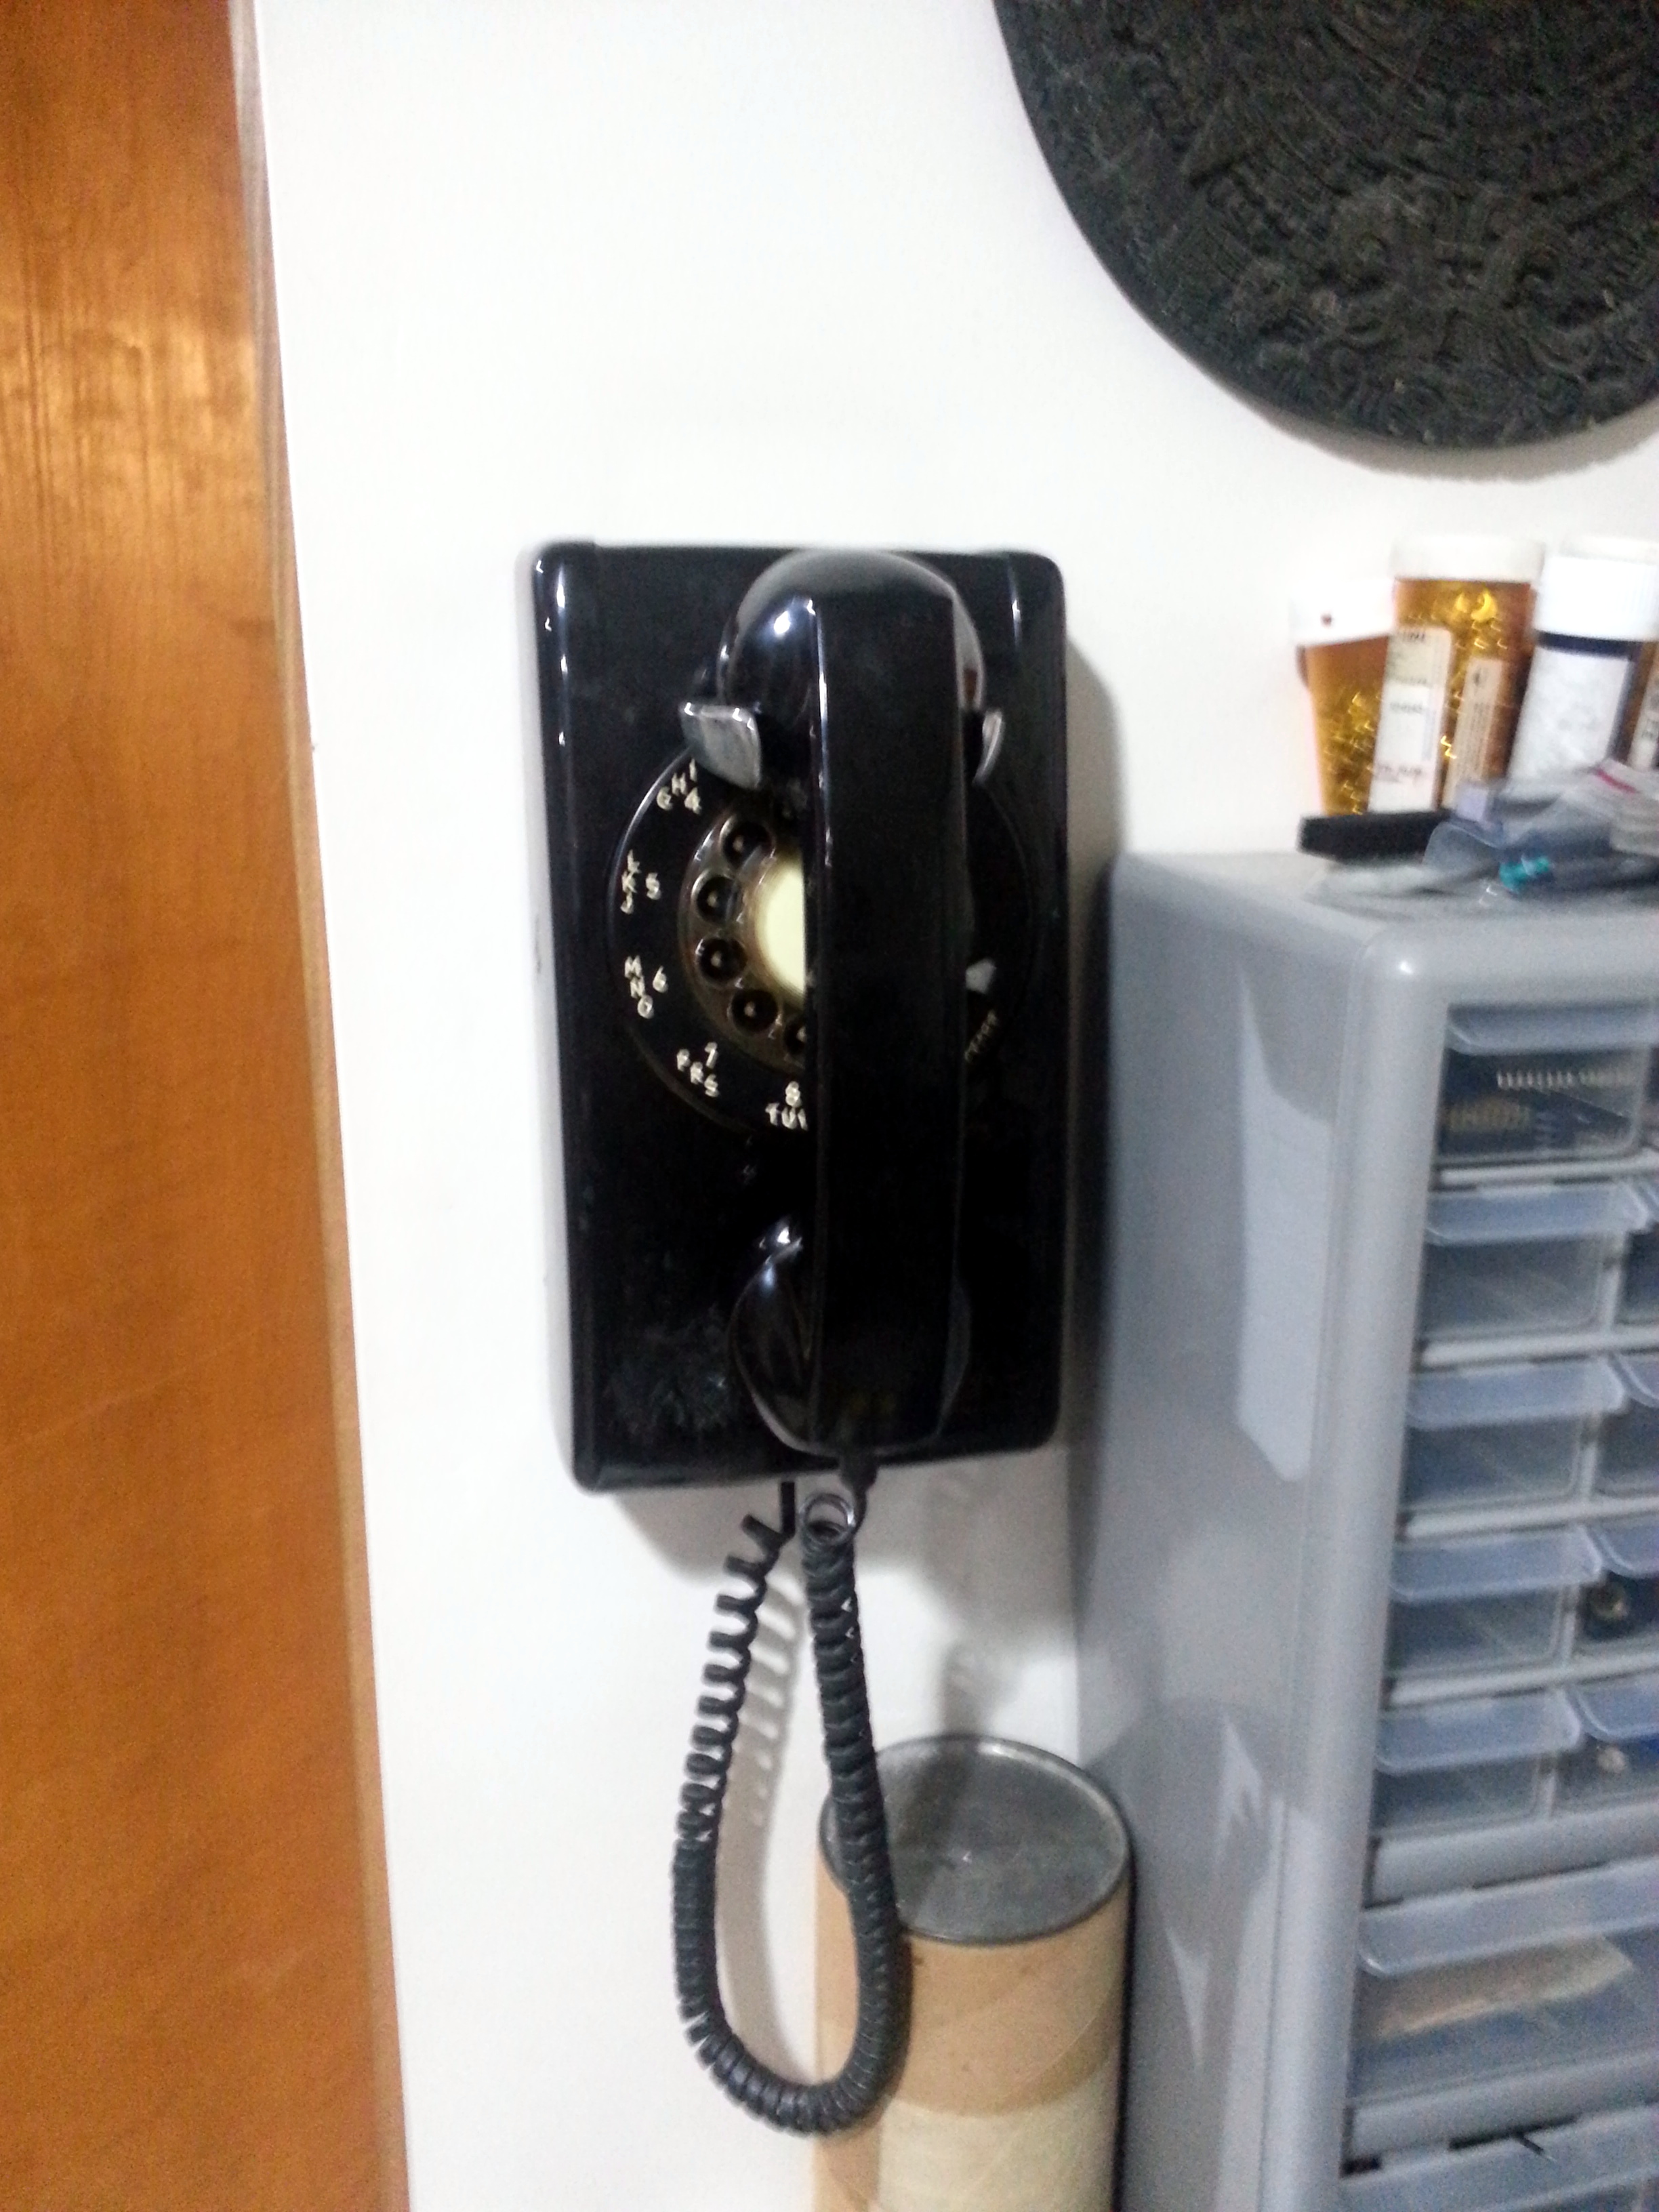 Pic of rotary phone hanging on the wall